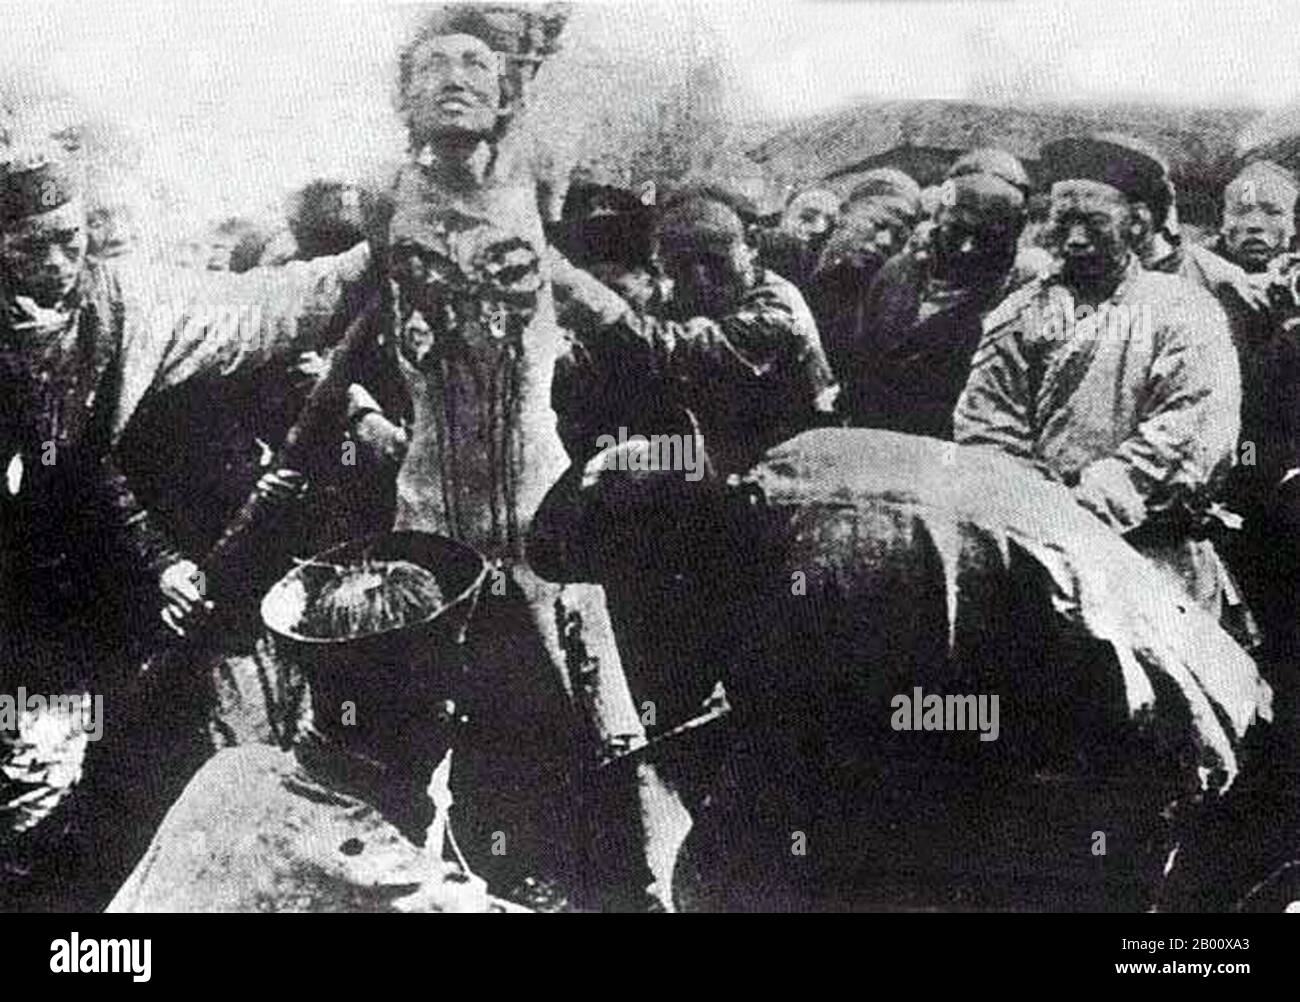 China: An execution by the 'Death of a Thousand Cuts', late Qing period, c. 1905.  'Slow slicing' (pinyin: língchí, alternately transliterated Ling Chi or Leng T'che), also translated as the slow process, the lingering death, or death by a thousand cuts, was a form of execution used in China from roughly 900 CE until its abolition in 1905. In this form of execution, the condemned person was killed by using a knife to methodically remove portions of the body over an extended period of time. The term língchí derives from a classical description of ascending a mountain slowly. Stock Photo